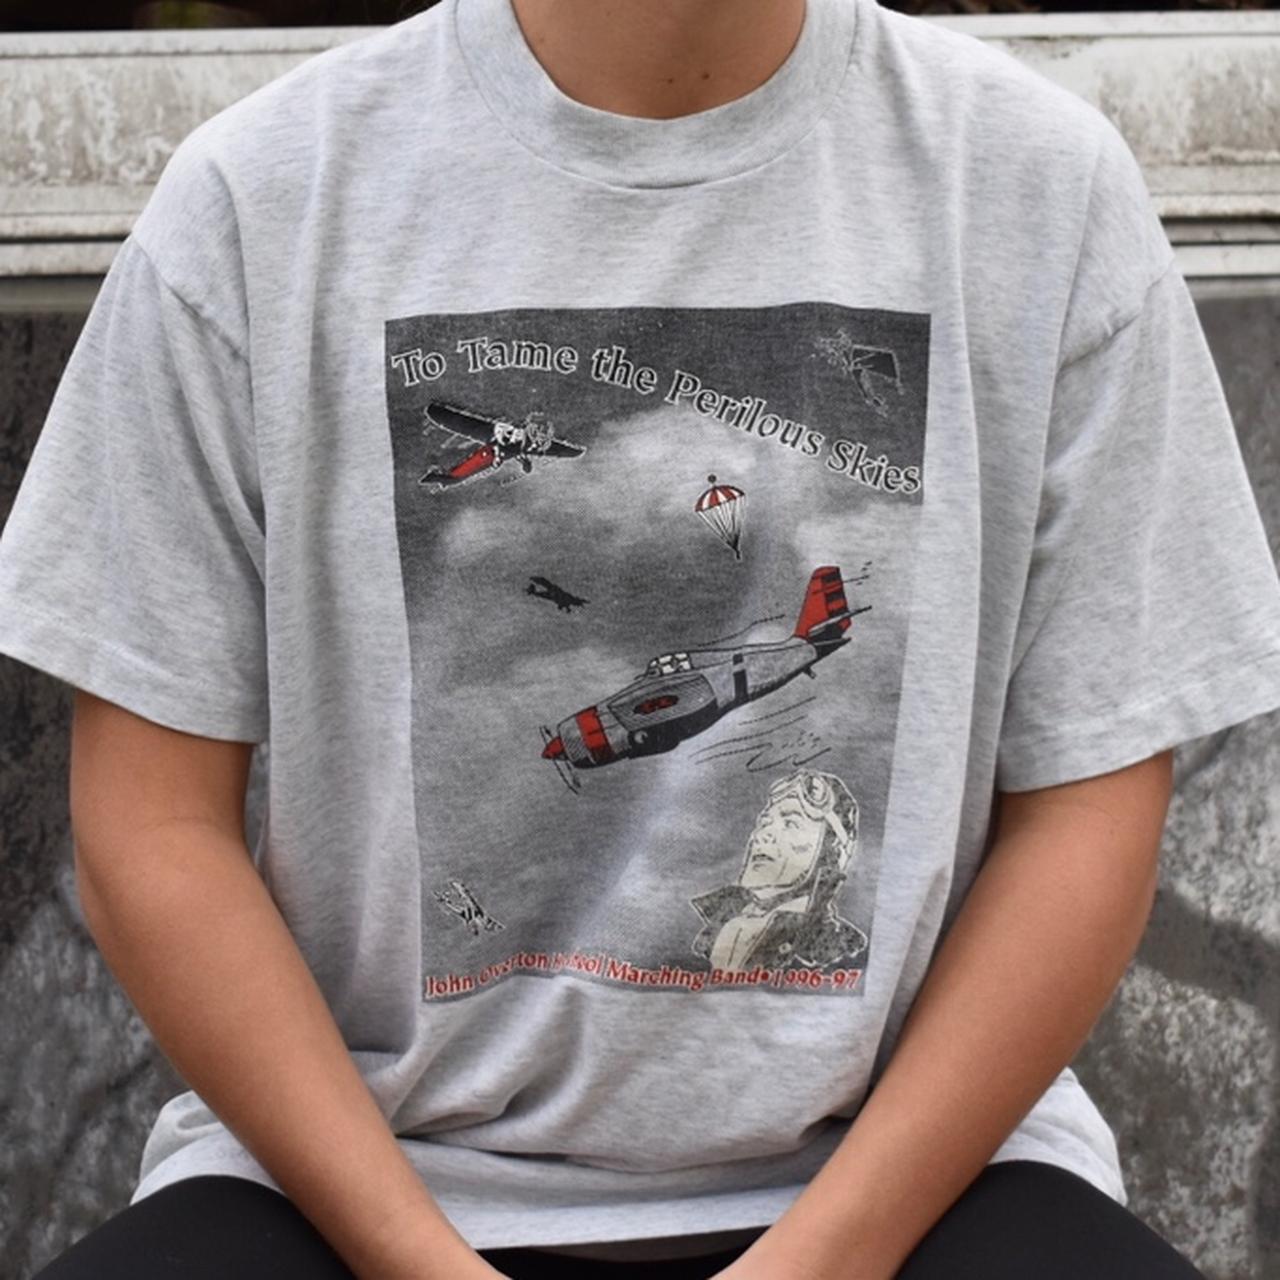 Product Image 1 - Vintage Perilous Skies Tee

color: Gray
size: